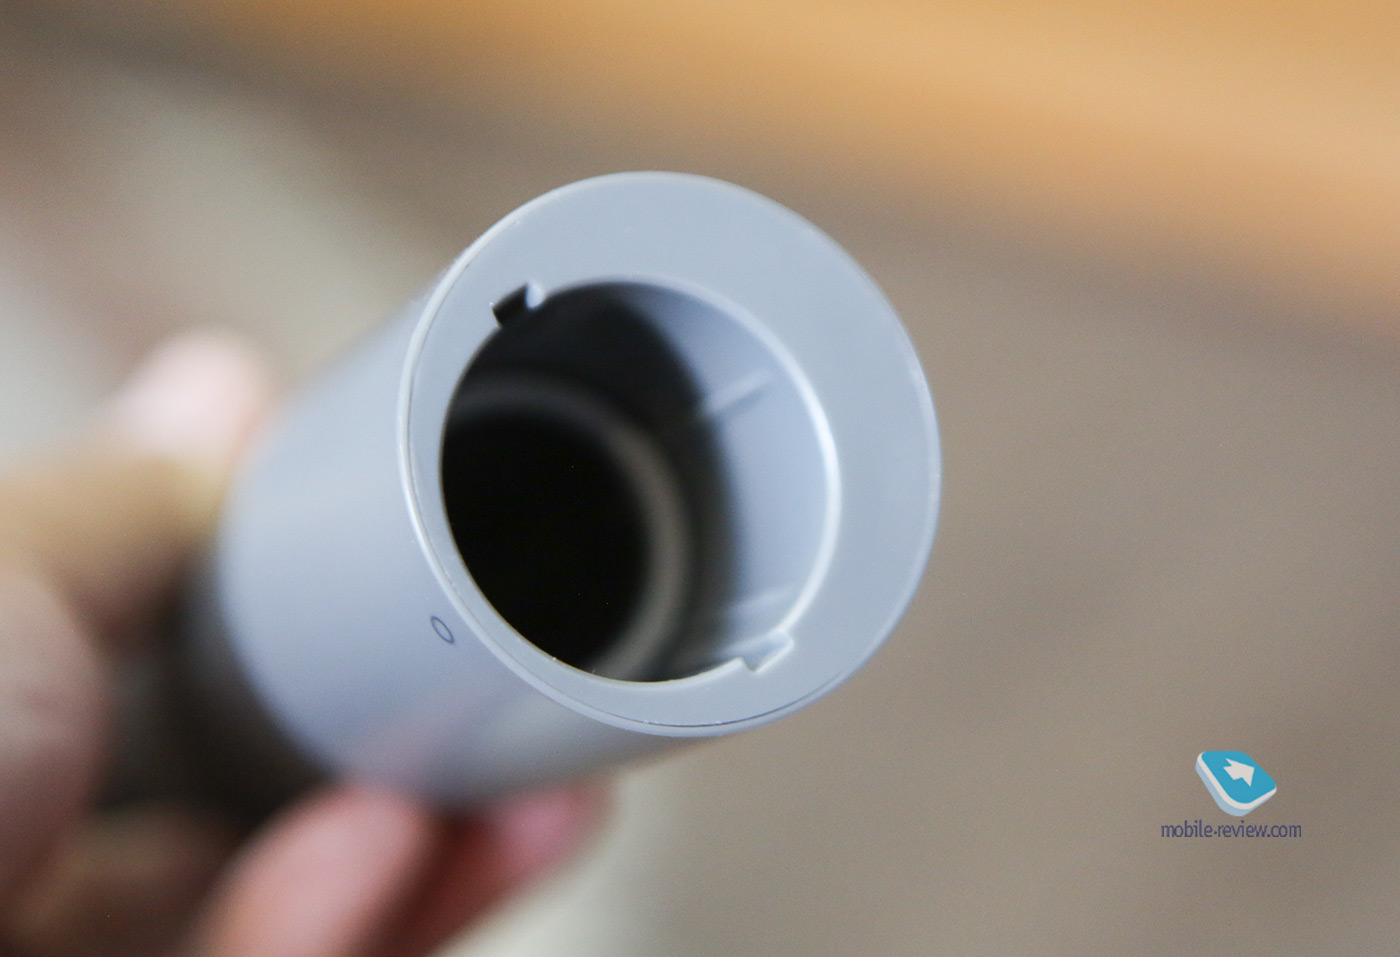 Review of Xiaomi Dreame V11 cordless vacuum cleaner